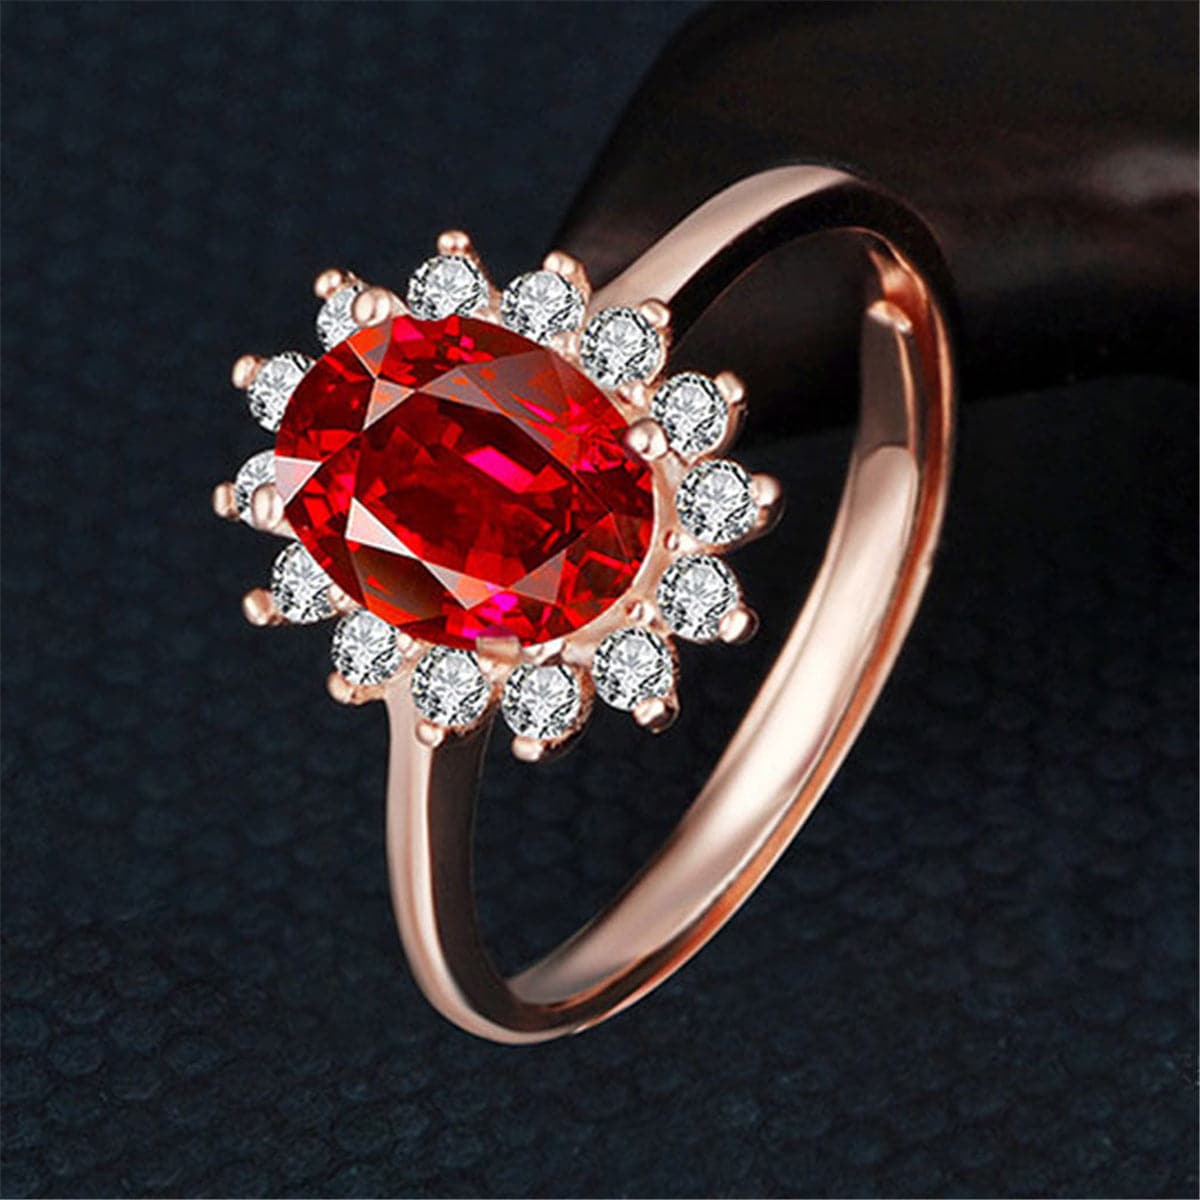 Red Crystal & cubic zirconia Floral Edge Adjustable Ring - streetregion